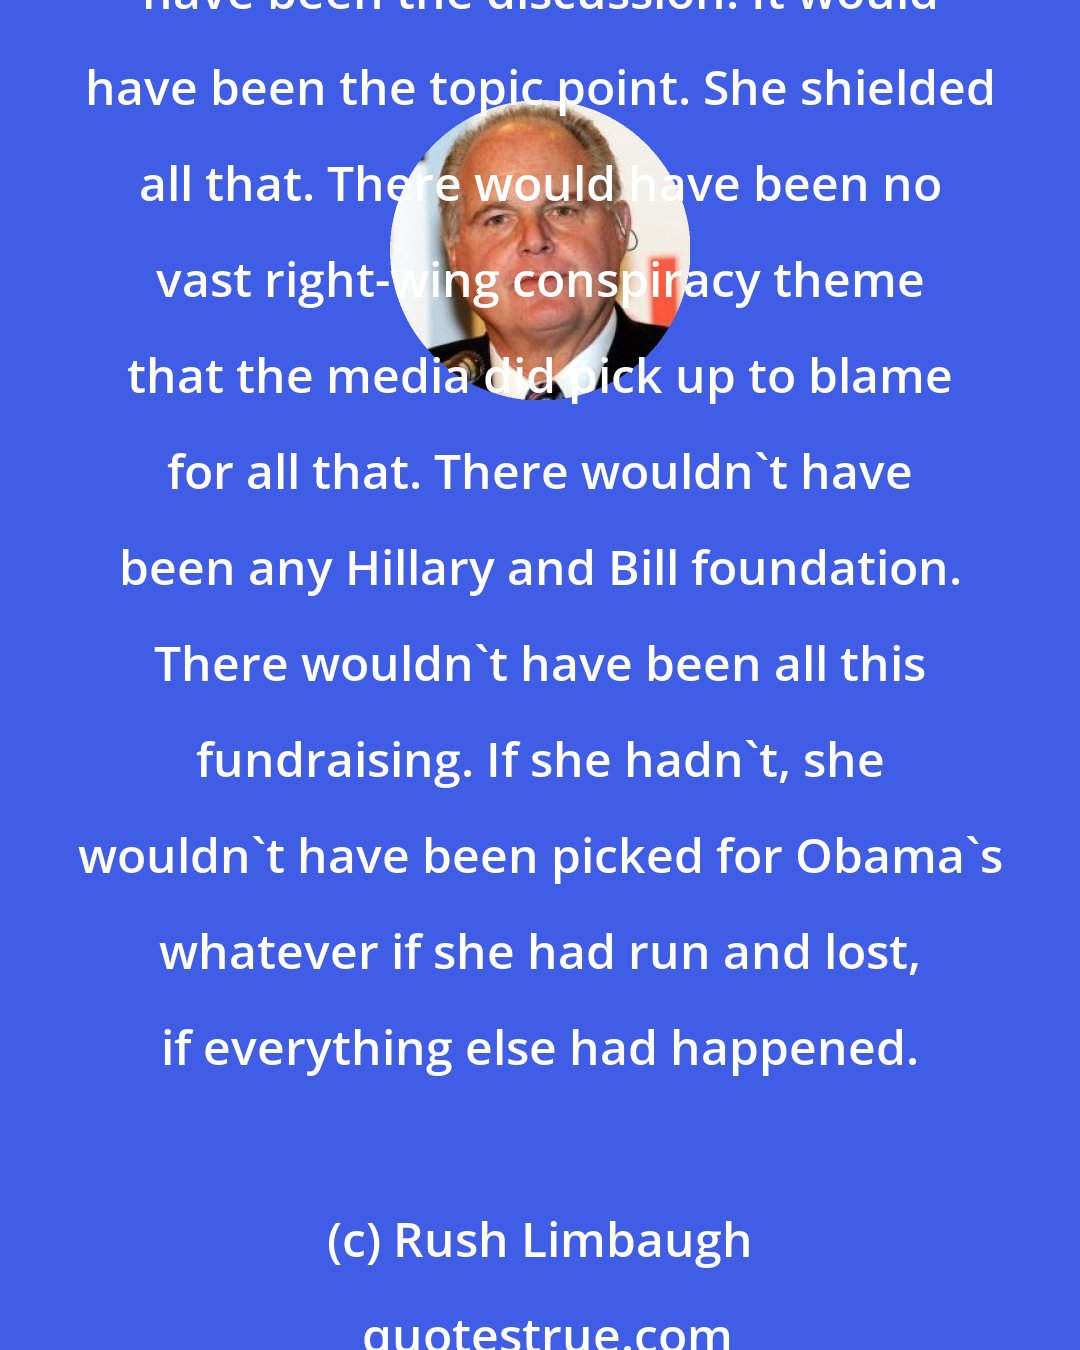 Rush Limbaugh: If Hillary Clinton would have left Bill, that would have ended his presidency, not via impeachment but that would have elevated his total lack of character. It would have been the discussion. It would have been the topic point. She shielded all that. There would have been no vast right-wing conspiracy theme that the media did pick up to blame for all that. There wouldn't have been any Hillary and Bill foundation. There wouldn't have been all this fundraising. If she hadn't, she wouldn't have been picked for Obama's whatever if she had run and lost, if everything else had happened.